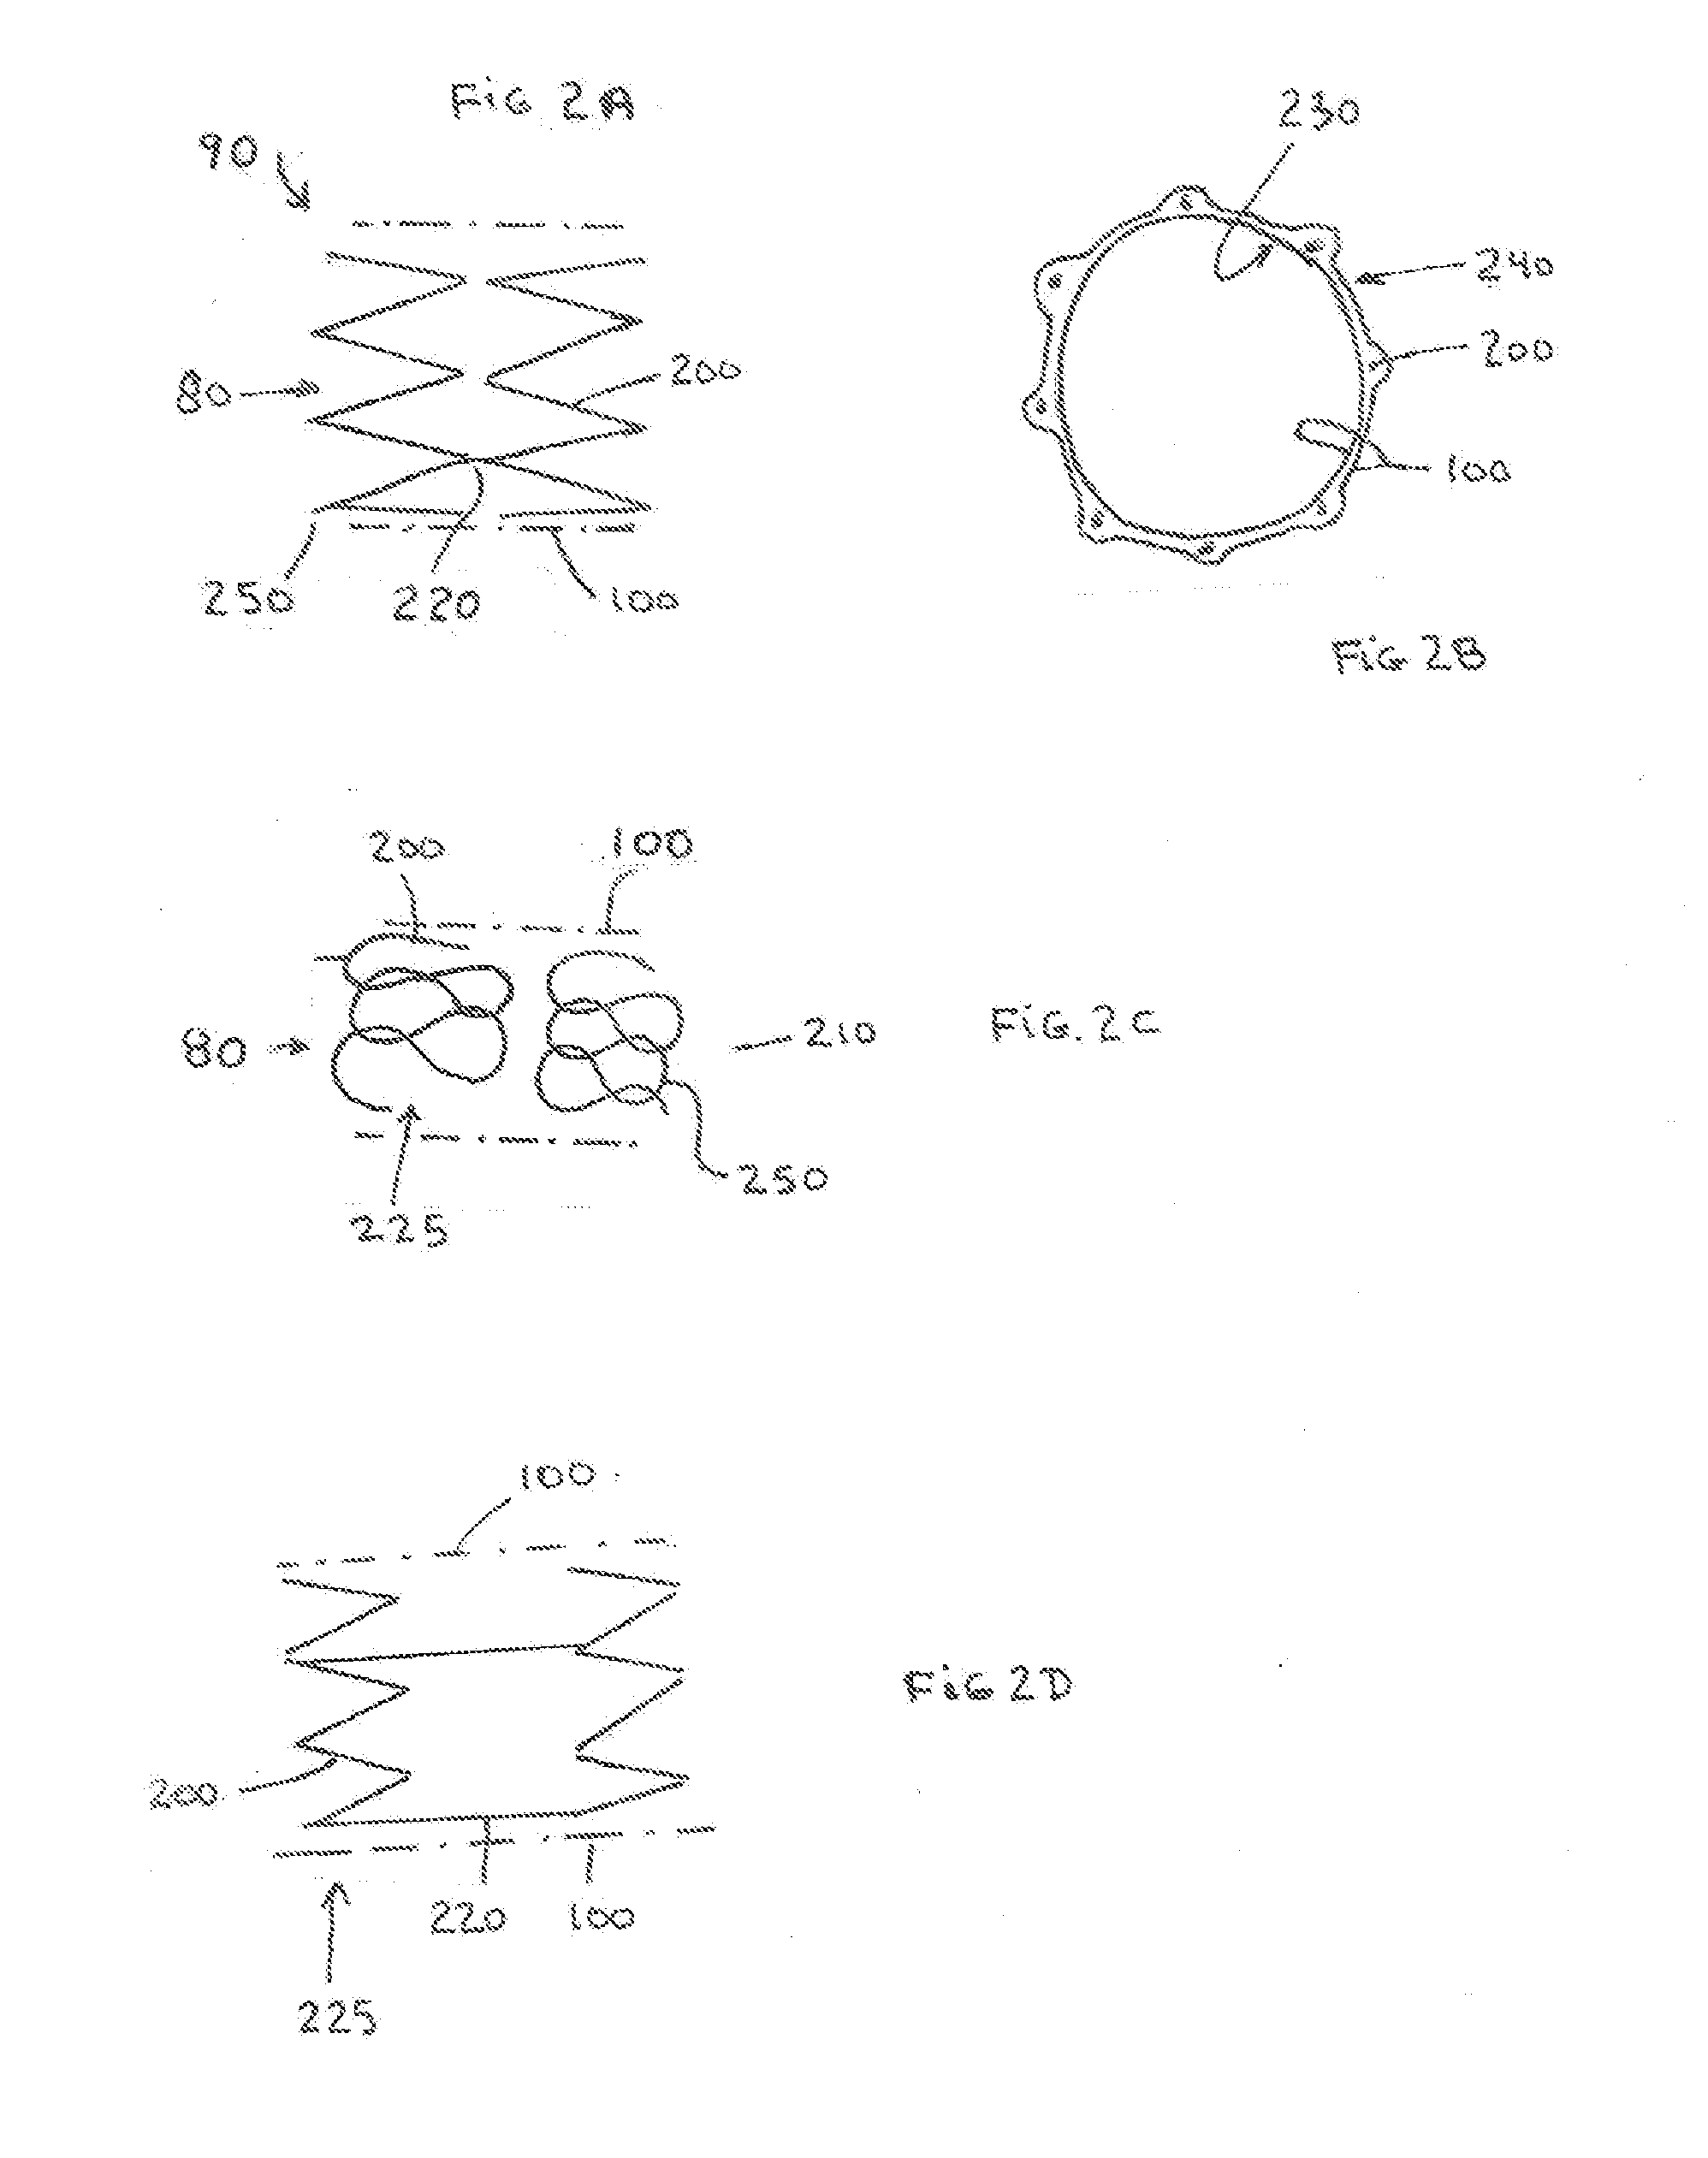 Large Vessel Closure Device and Method